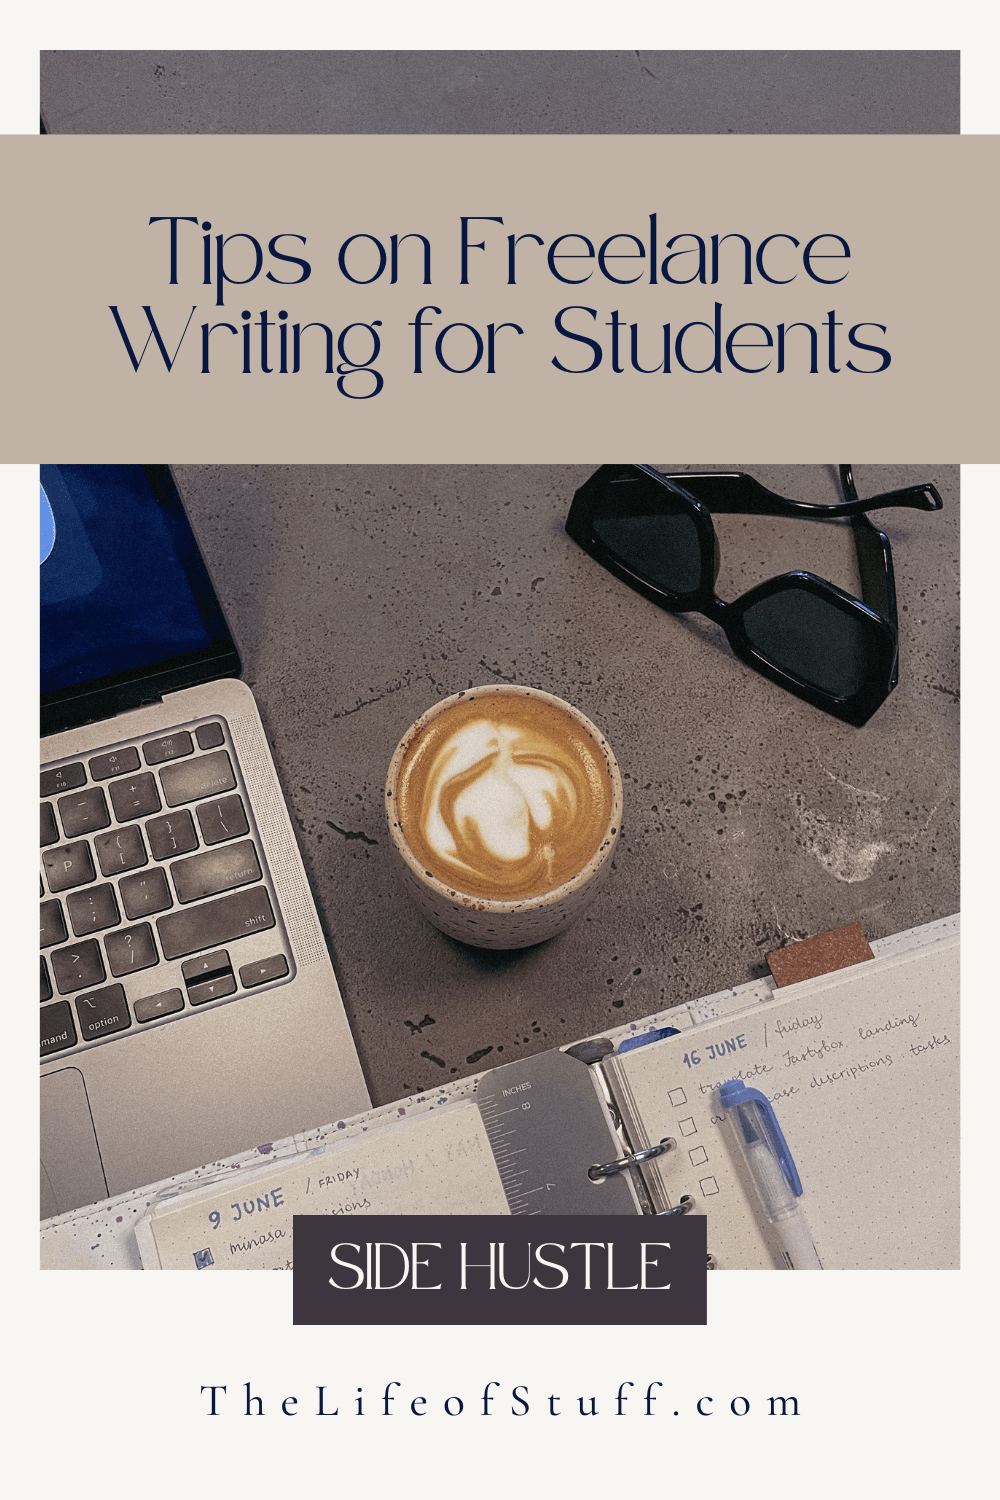 Tips on Freelance Writing for Students - The Life of Stuff